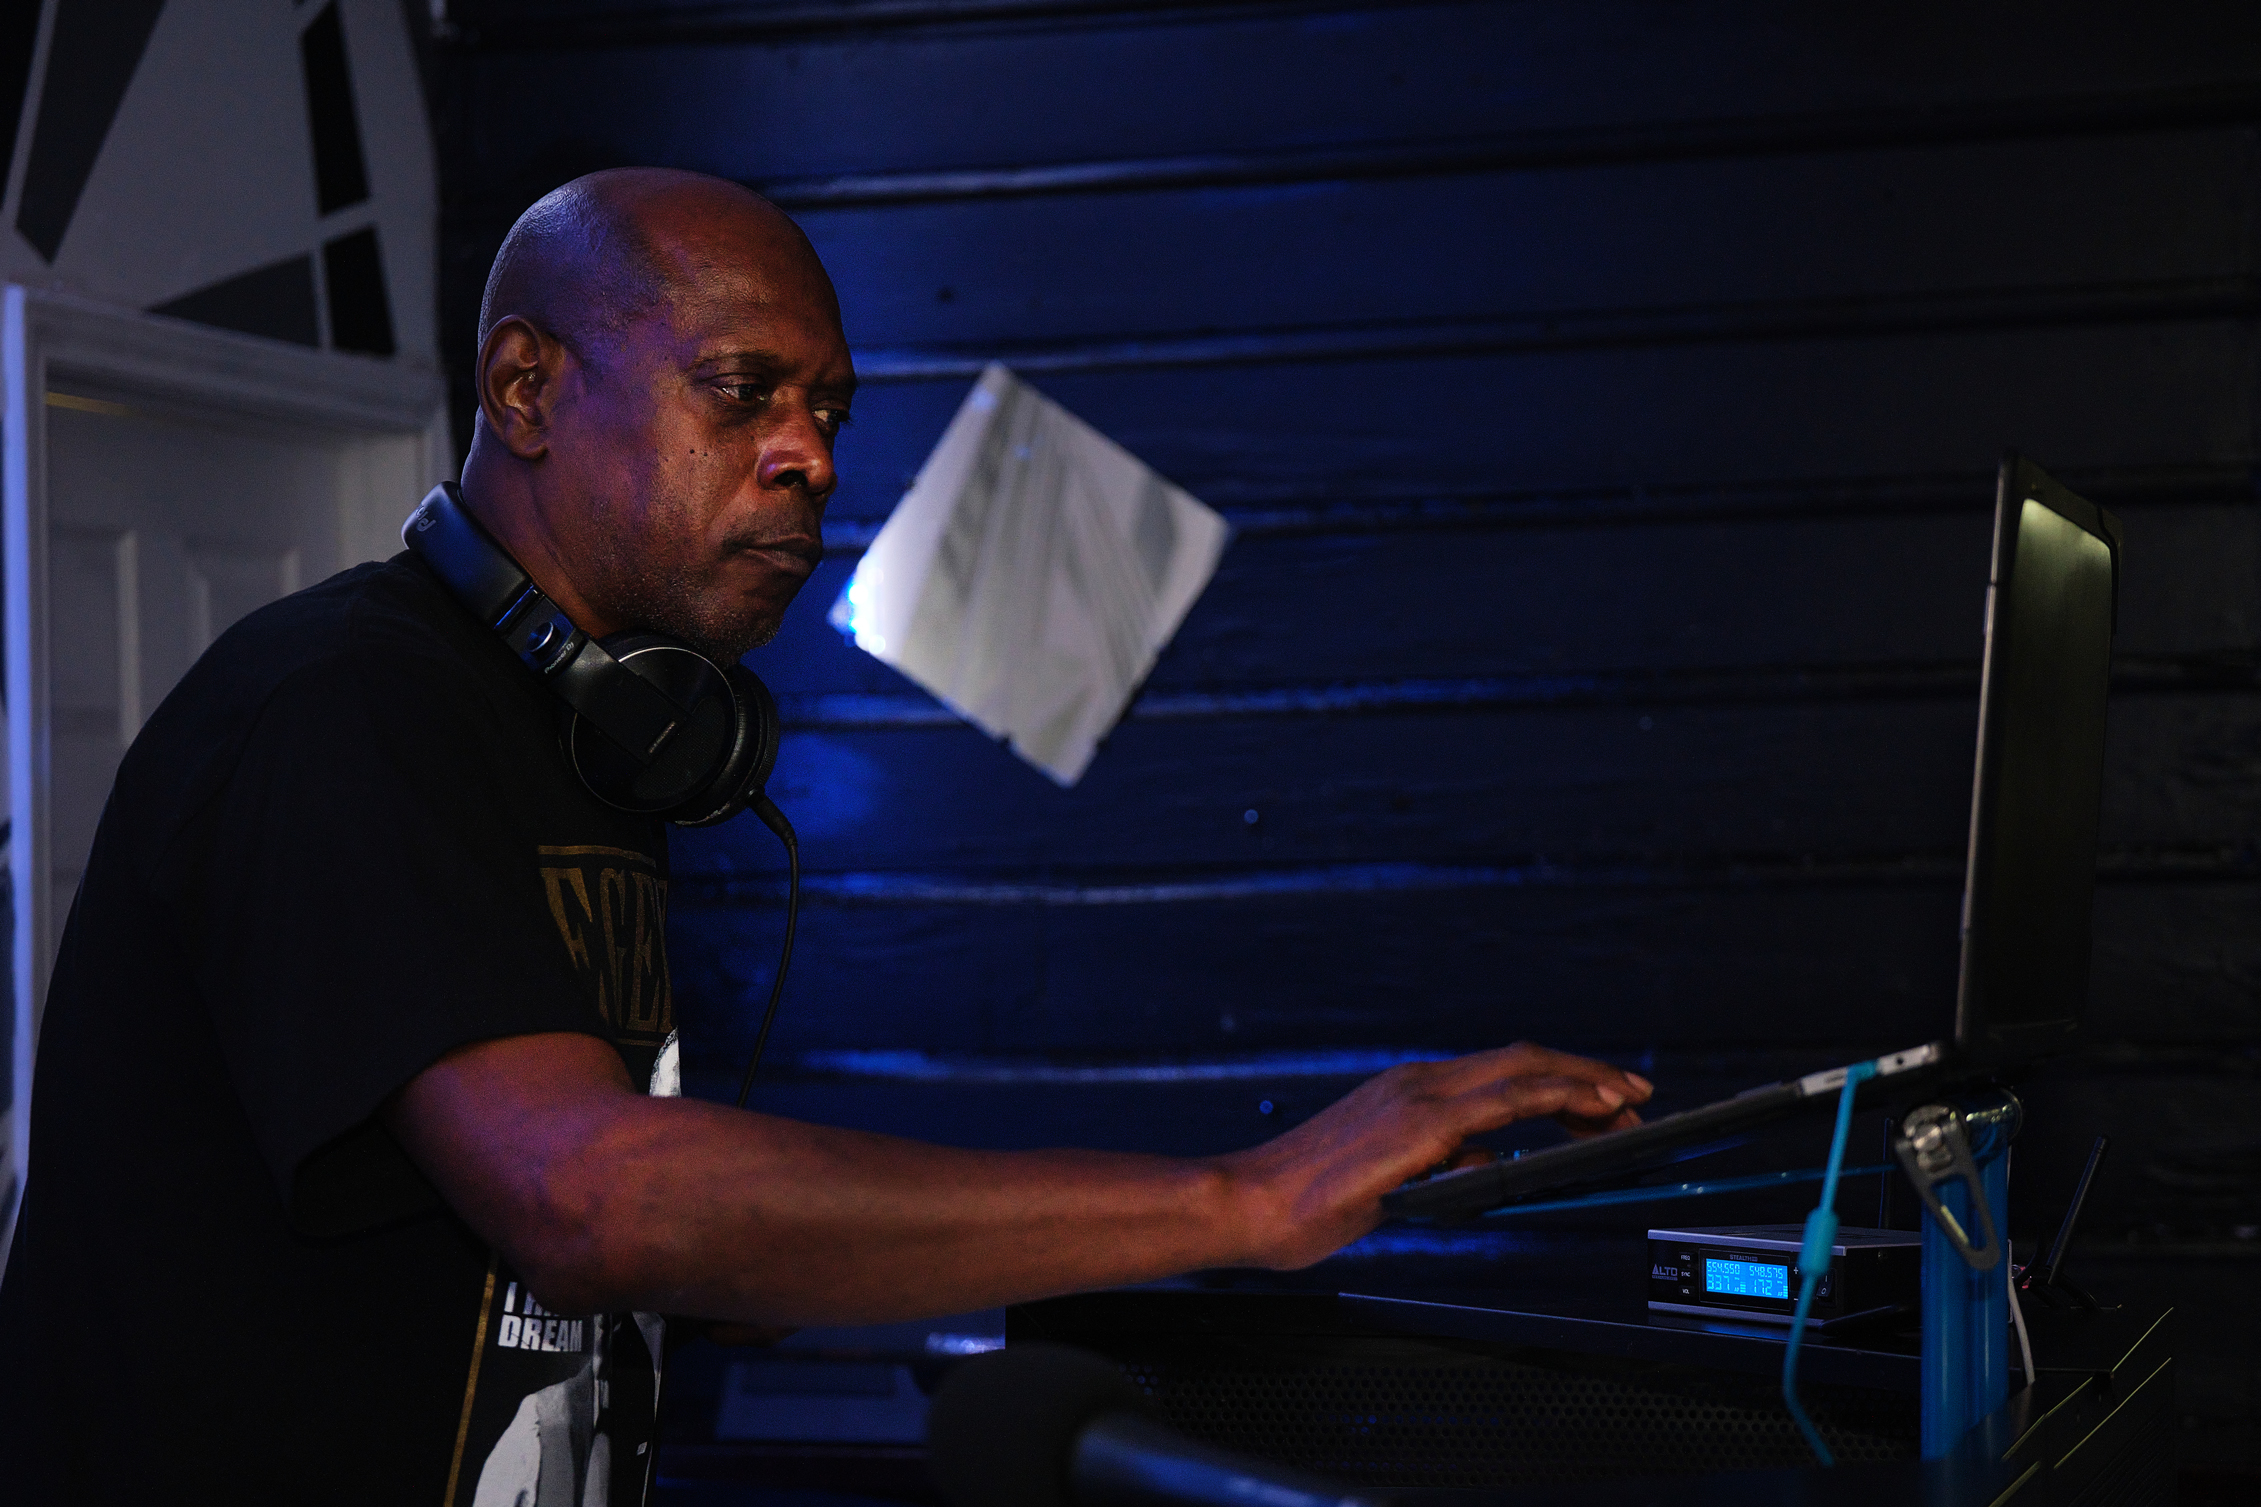 Willie Osberry, known as DJ TNT, plays music at Club 68, a long-time gathering spot for the Black community in Galveston